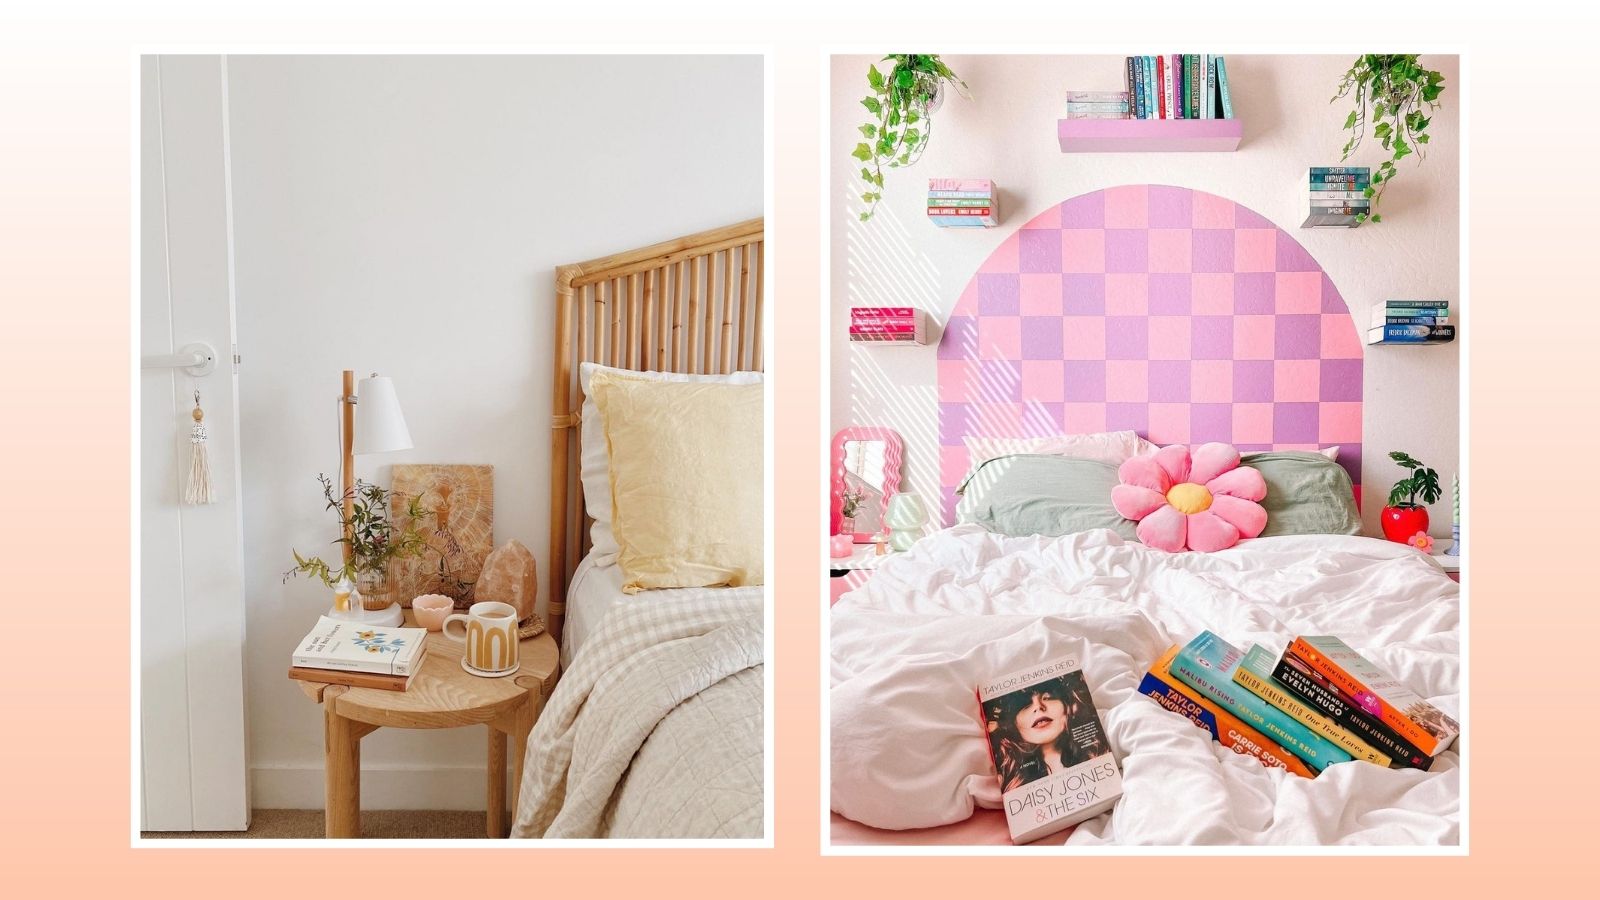 12 Ways You Can Organize Your Small Bedroom on a Small Budget